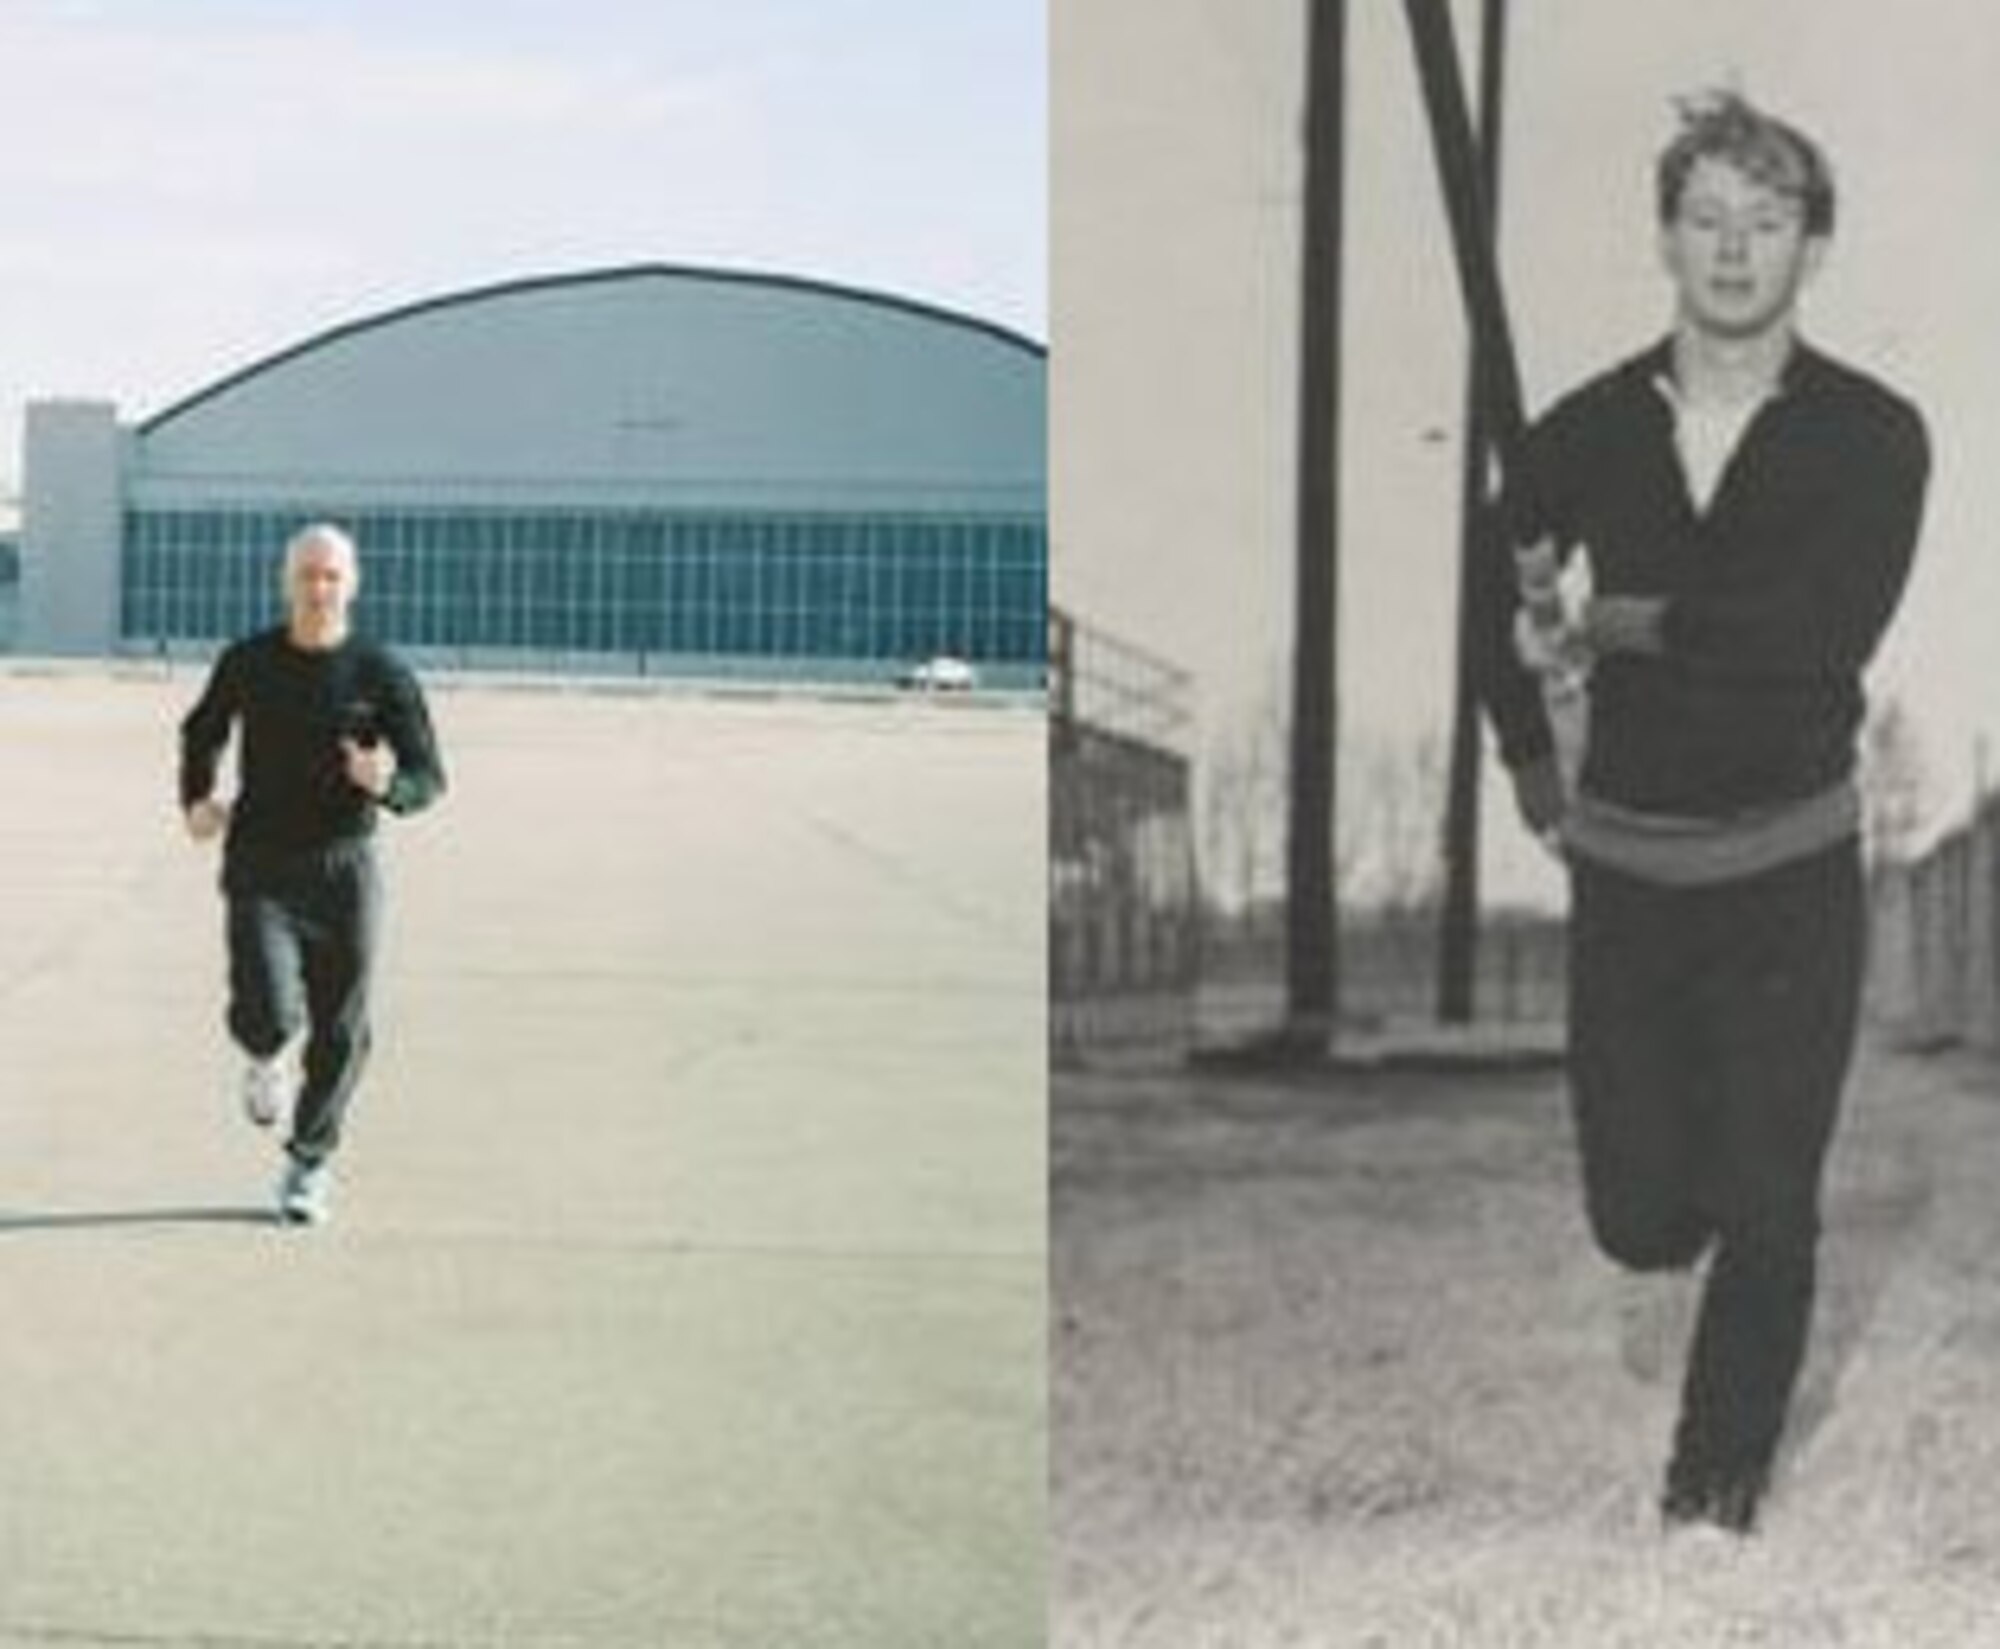 Lt. Col. Gary Hopper (left) trains for his fitness test in Area B at Wright-Patterson Air Force Base, Ohio. In 1971, a younger Colonel Hopper (right) competed for his high school track team. Colonel Hopper says physical conditioning is the main reason his body hasn't changed much. (Courtesy photos) 

